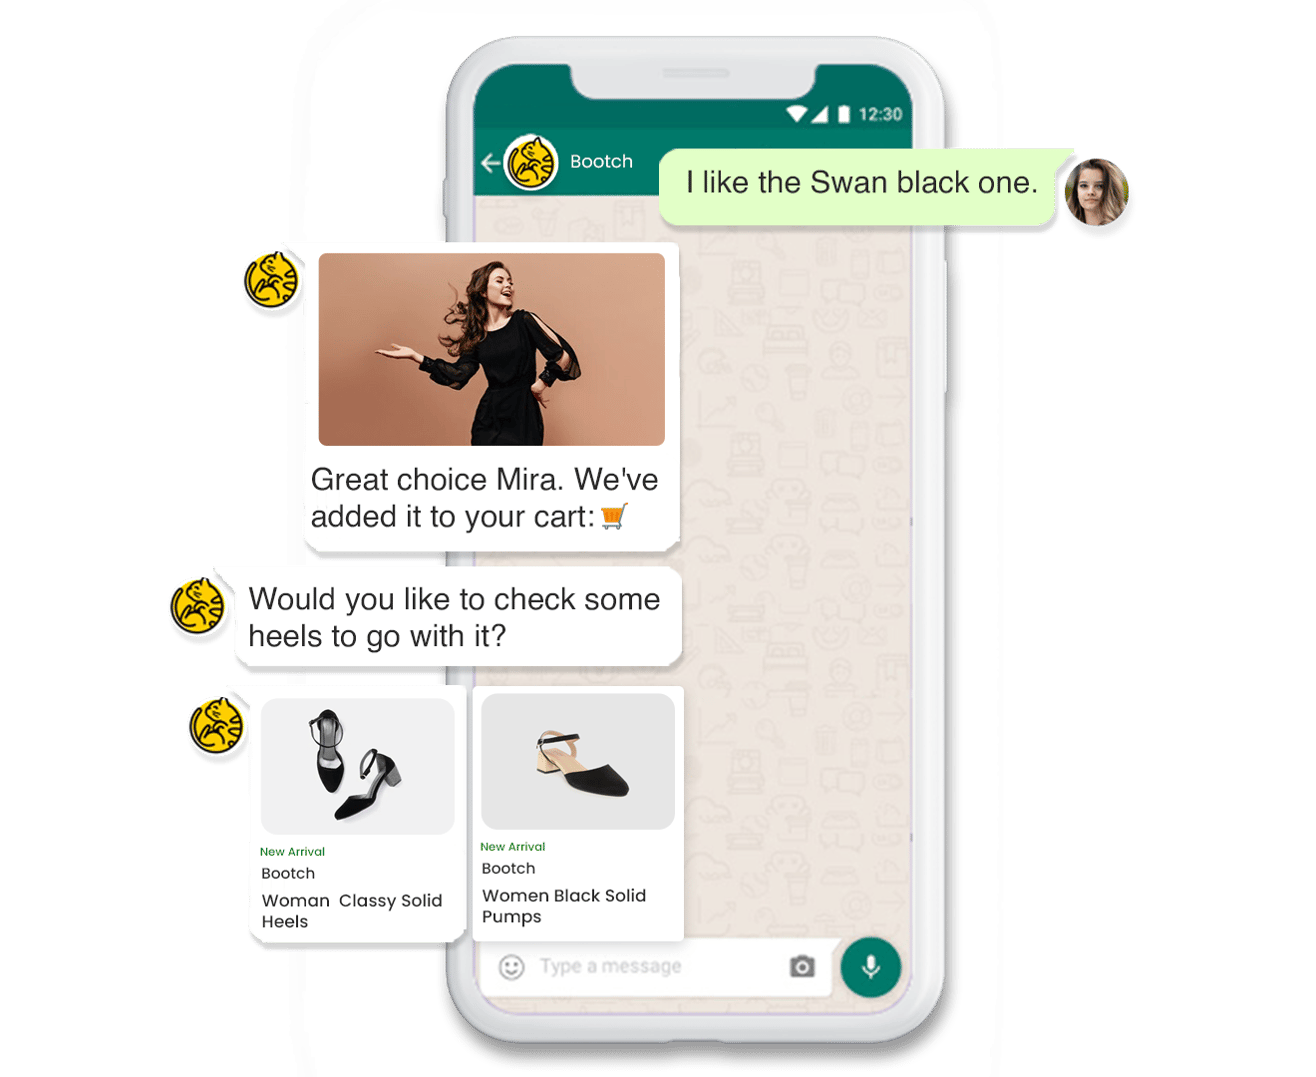 Product recommendations using conversational AI